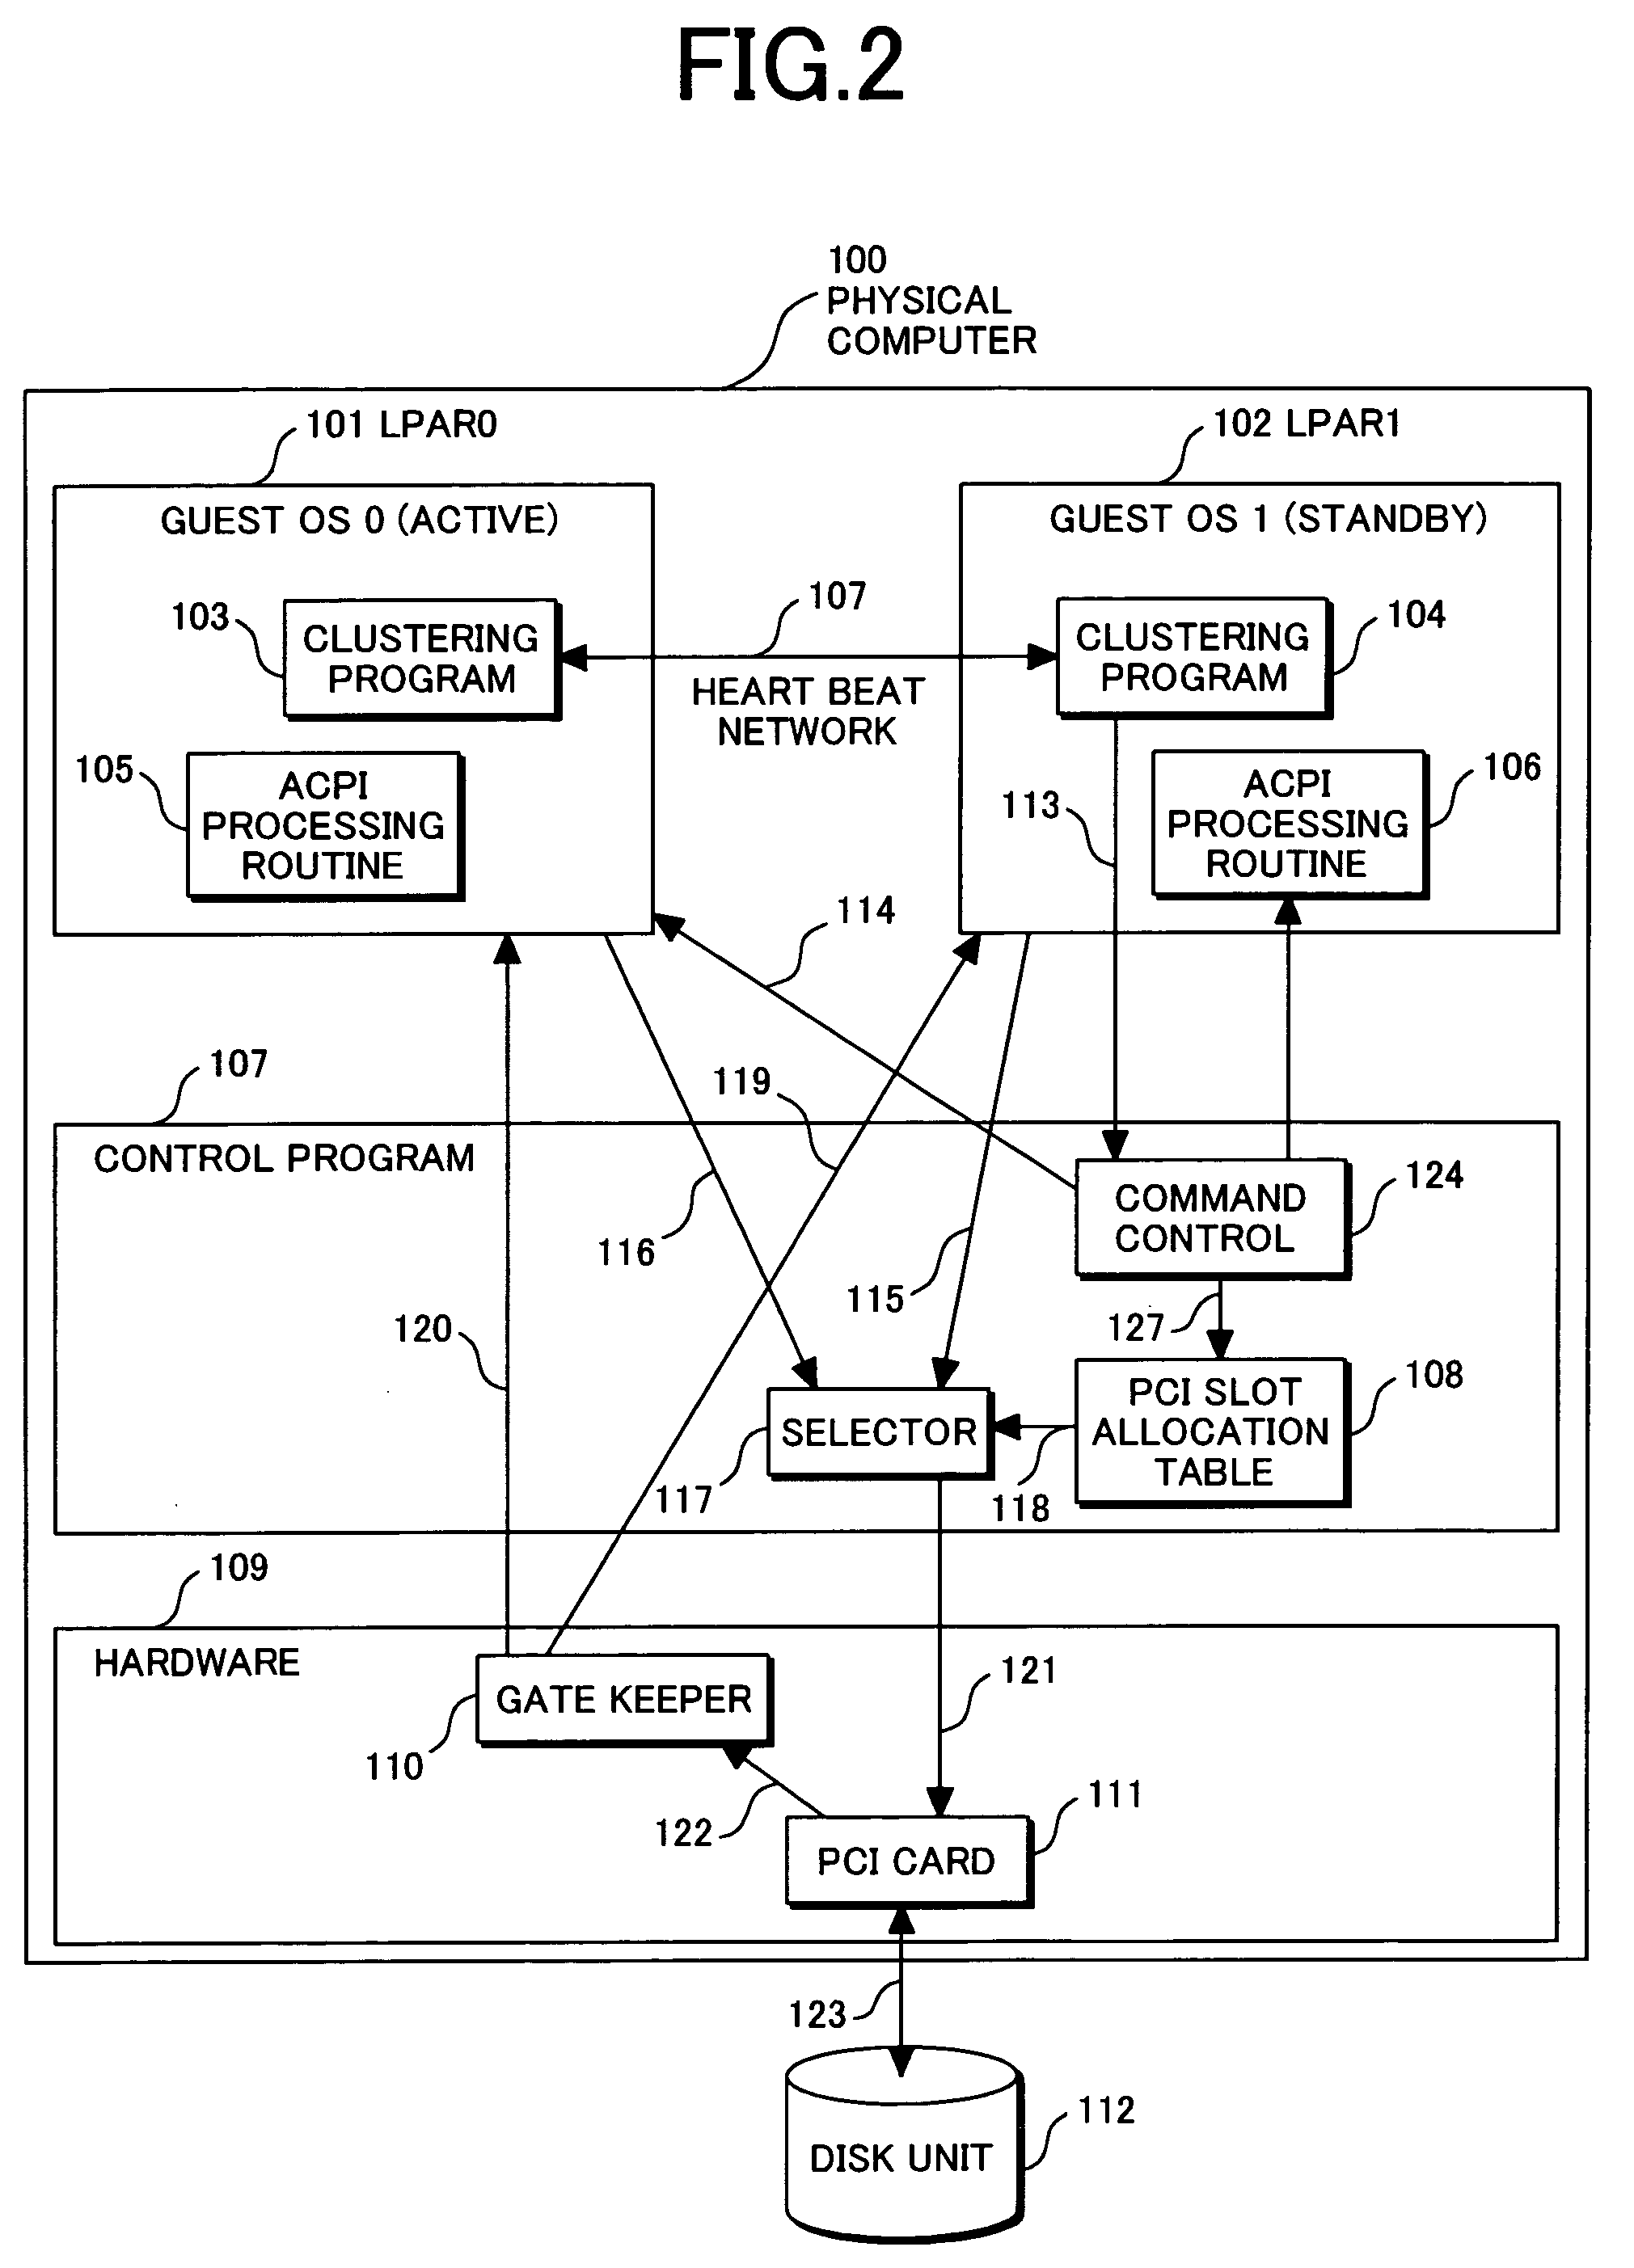 Fabric and method for sharing an I/O device among virtual machines formed in a computer system